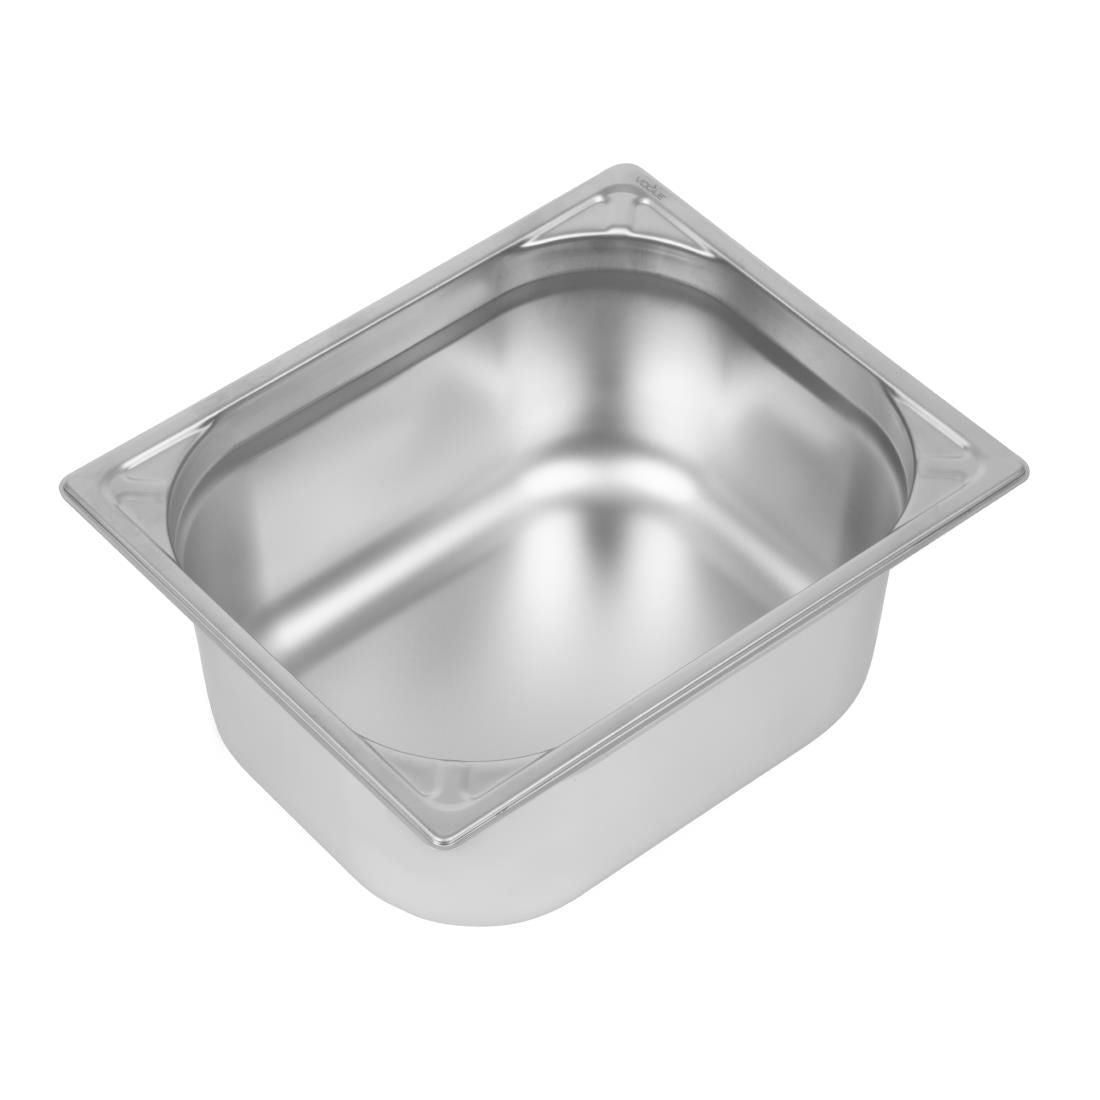 Vogue Heavy Duty Stainless Steel 1/2 Gastronorm Pan 150mm